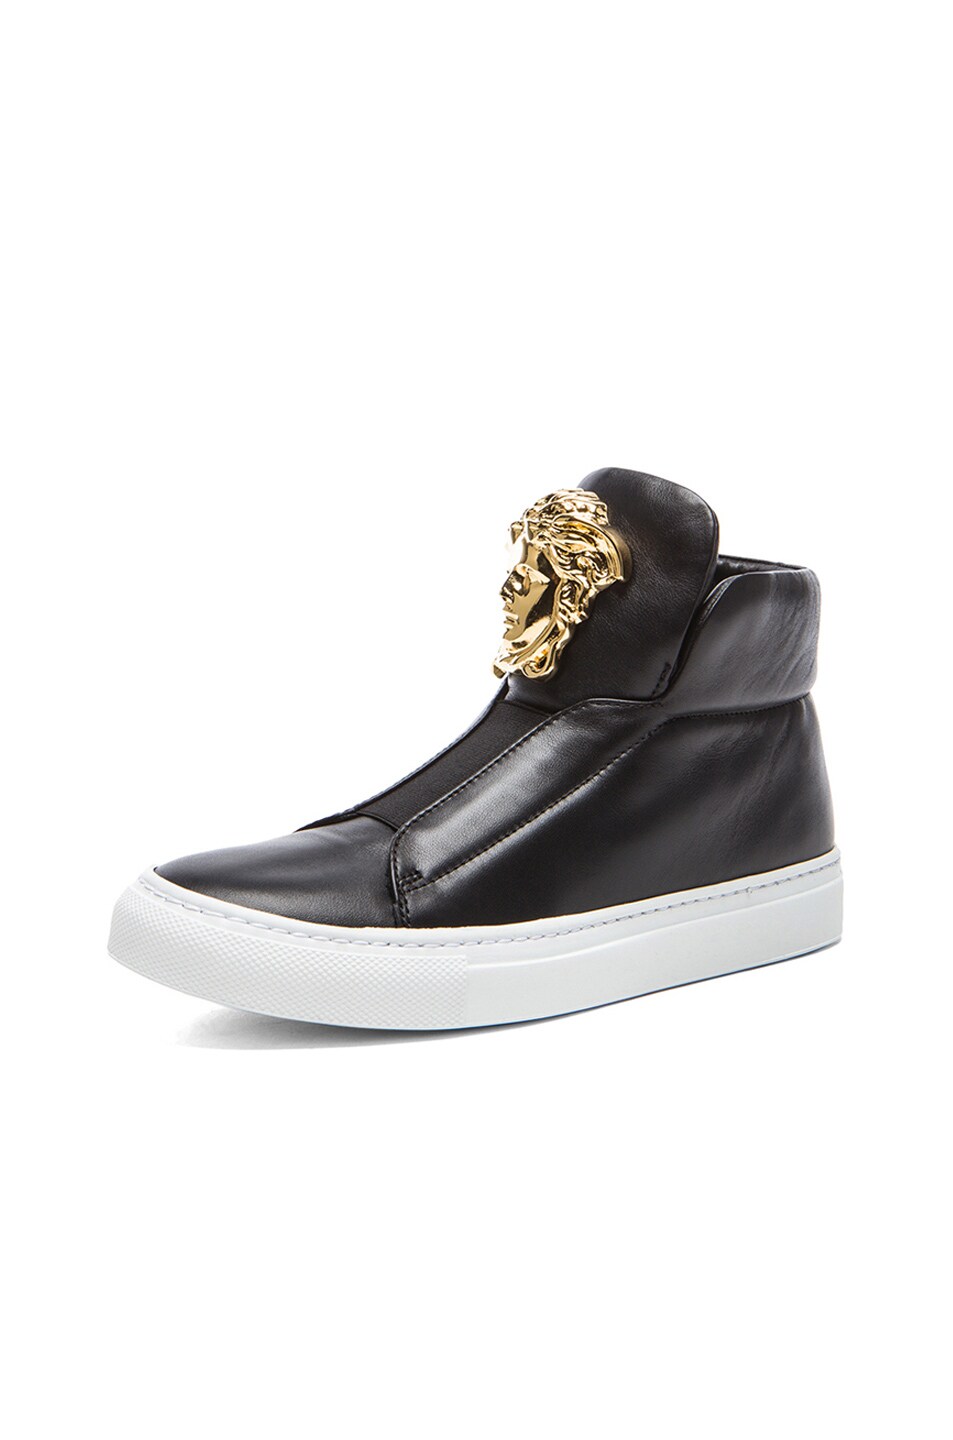 VERSACE Medusa Head Laceless Leather Sneakers In Black & Gold